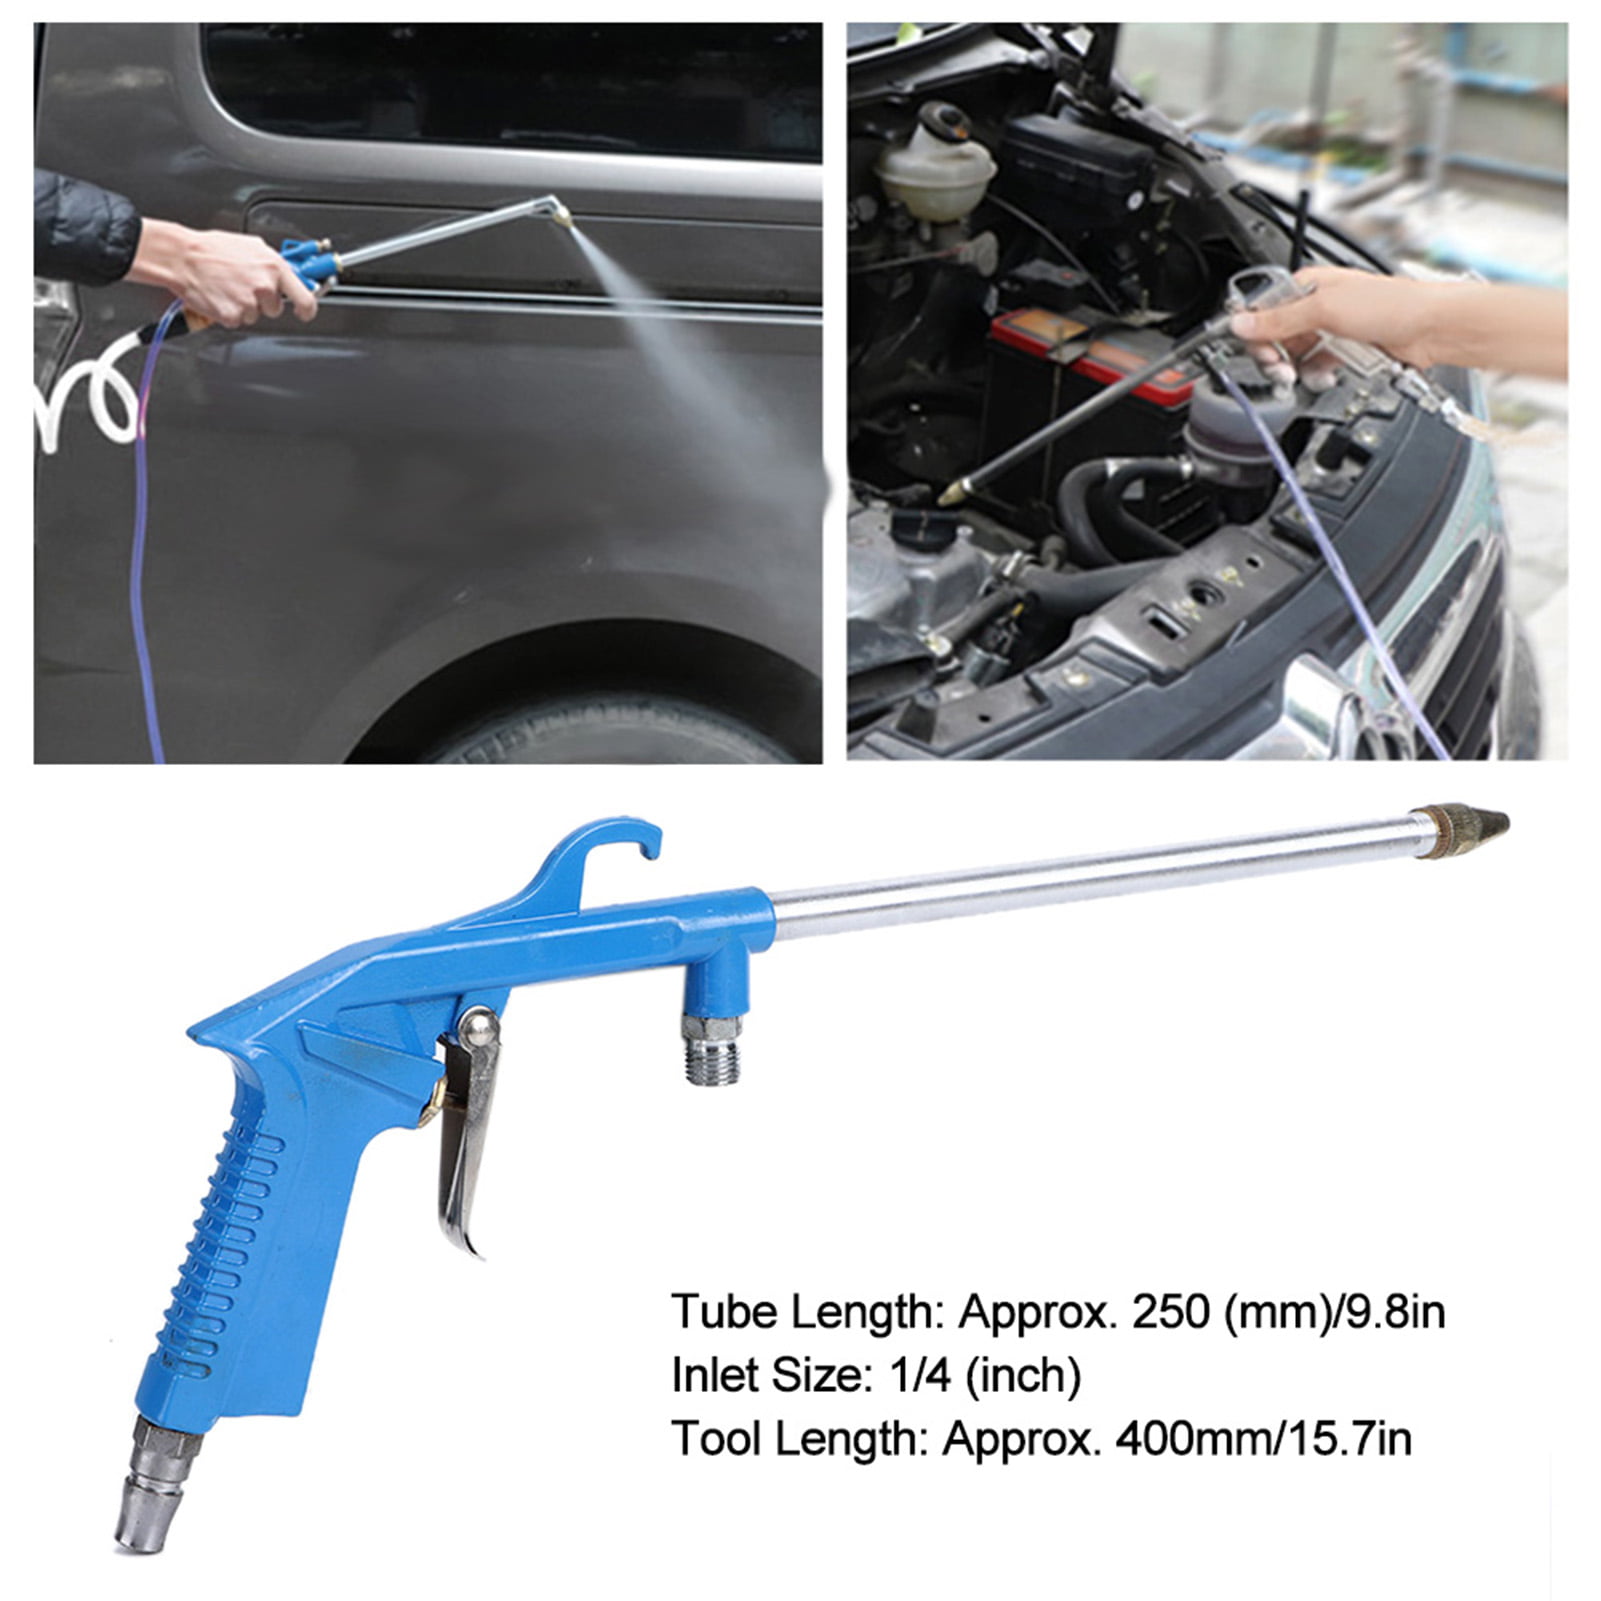 Acouto Pneumatic Cleaning Tool,Universal Car Engine Dust Cleaner Tools Auto Water Cleaning Nozzle Hose Wash Spray 